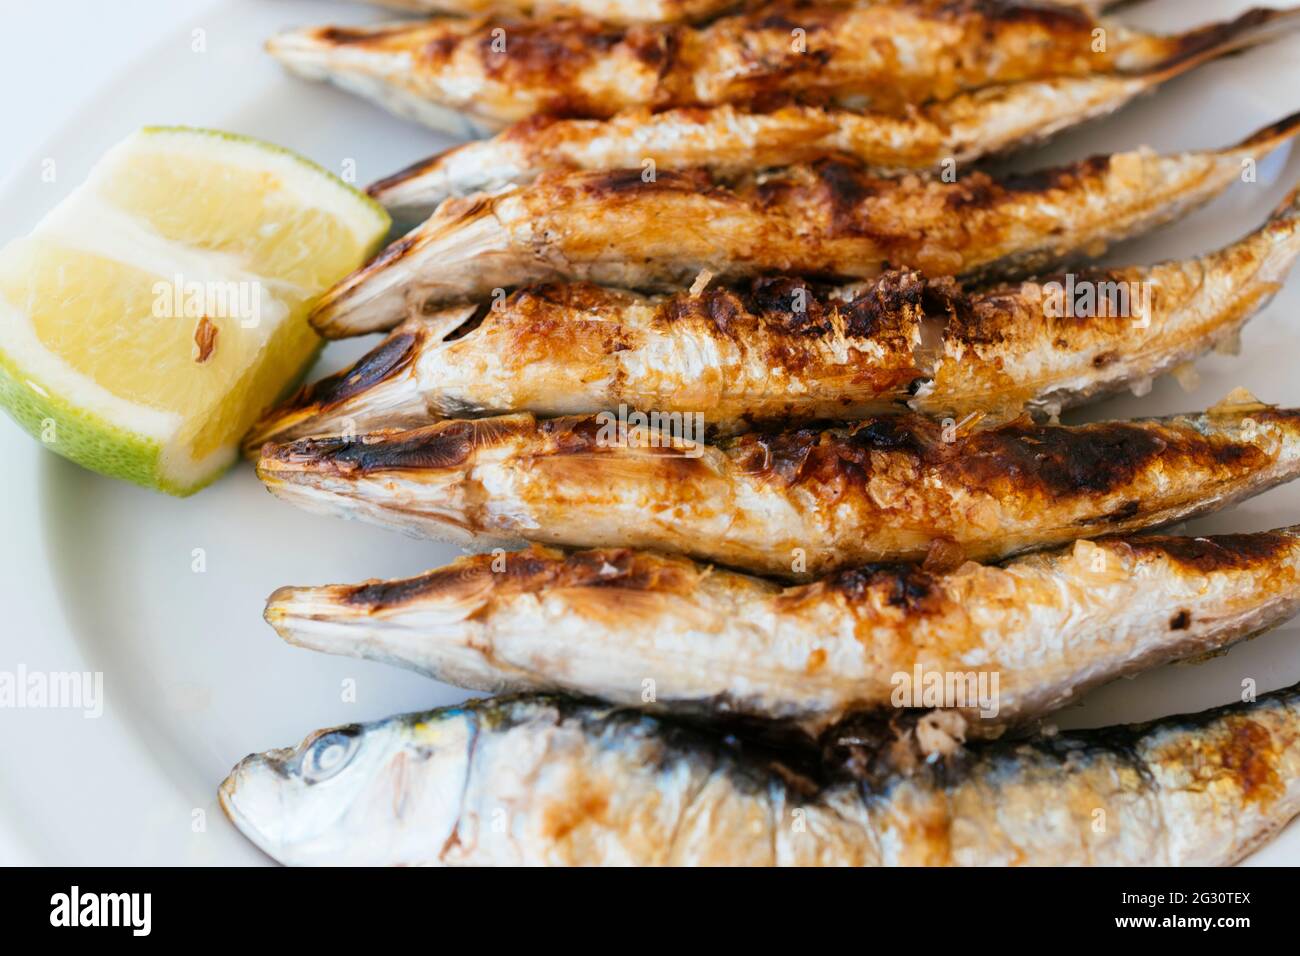 Typical Andalusian food. Grilled sardines - Sardines barbecueing. Torremolinos, Málaga, Andalucía Spain, Europe Stock Photo